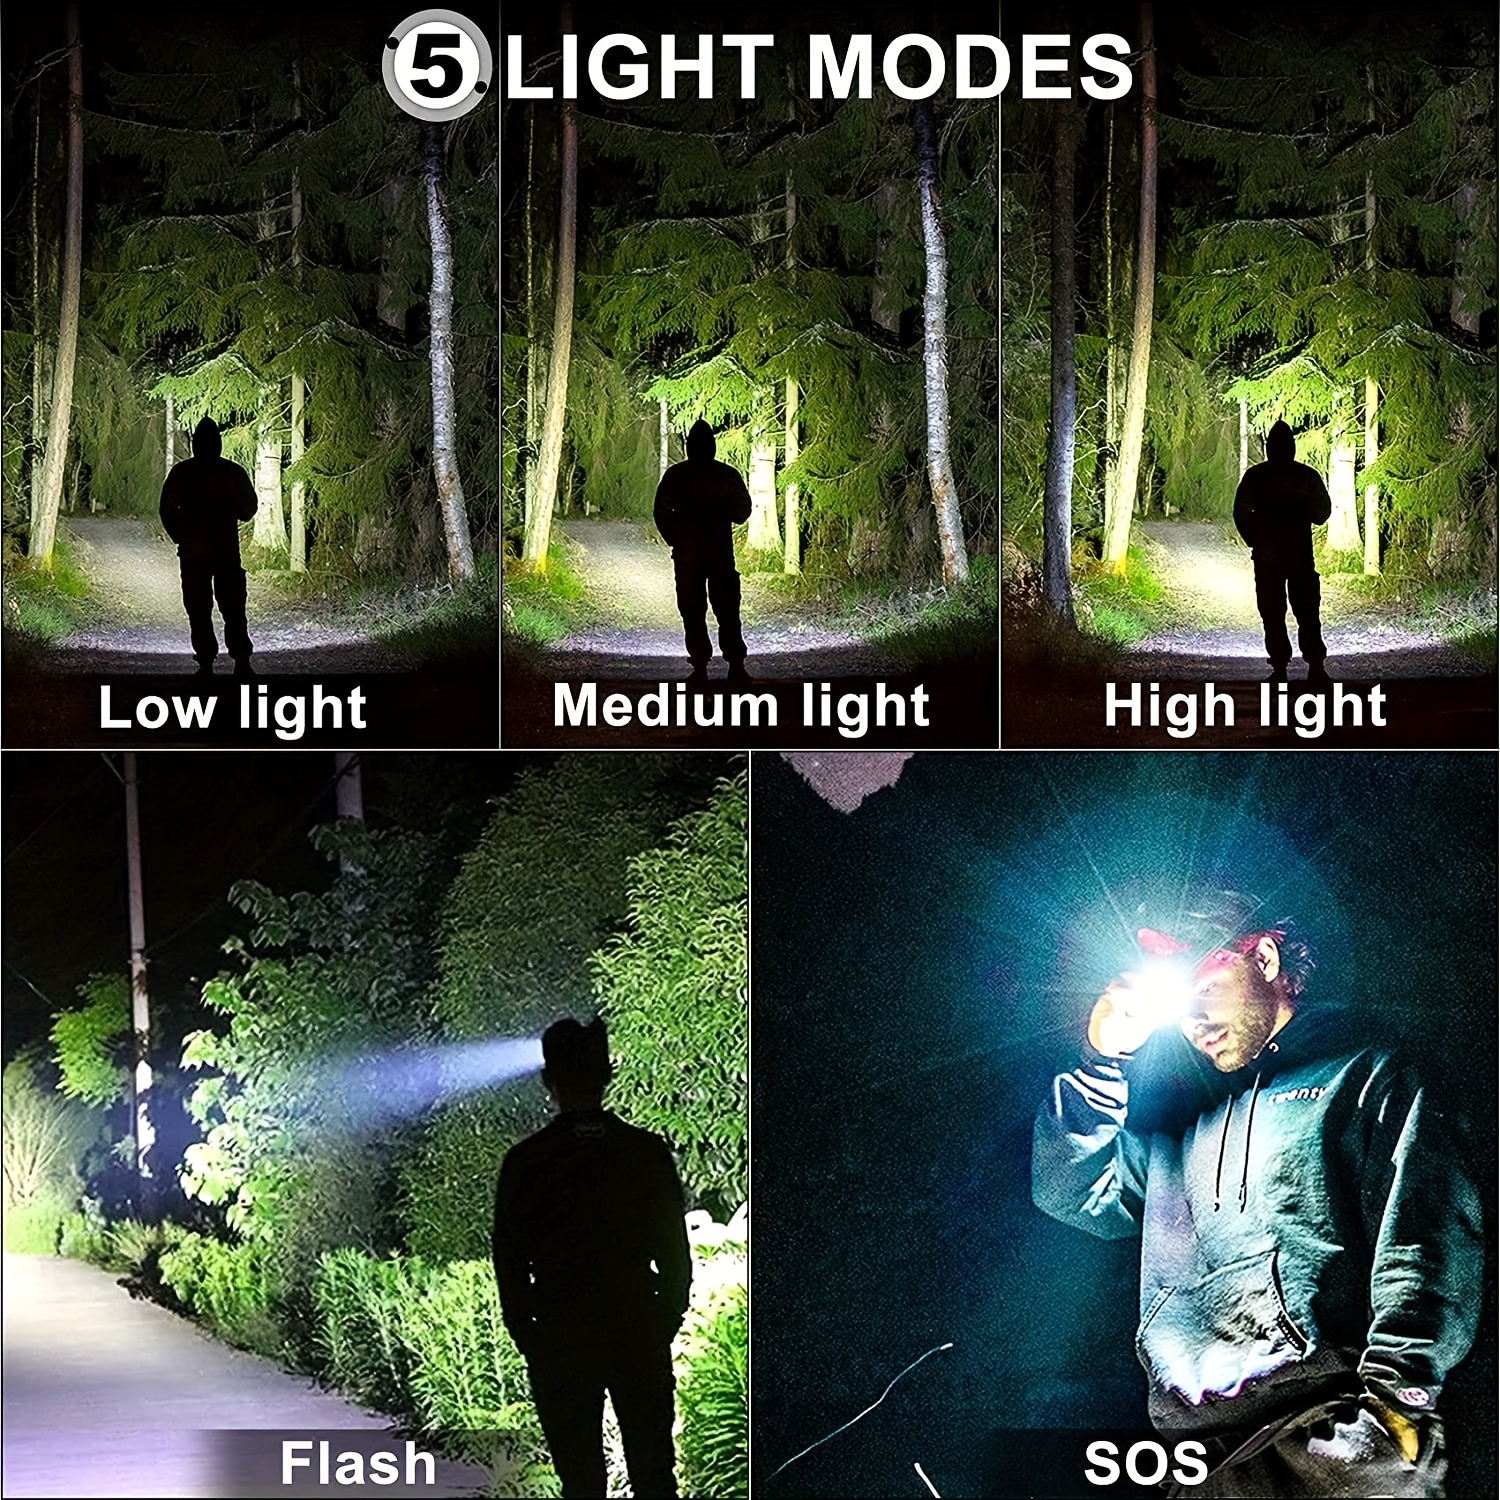 LED Headlamp USB Rechargeable, Head Lamp XHP70 Super Bright 90000 High Lumen with Modes, Batteries Included, Zoomable, Waterproof Headlight for Camp - 2